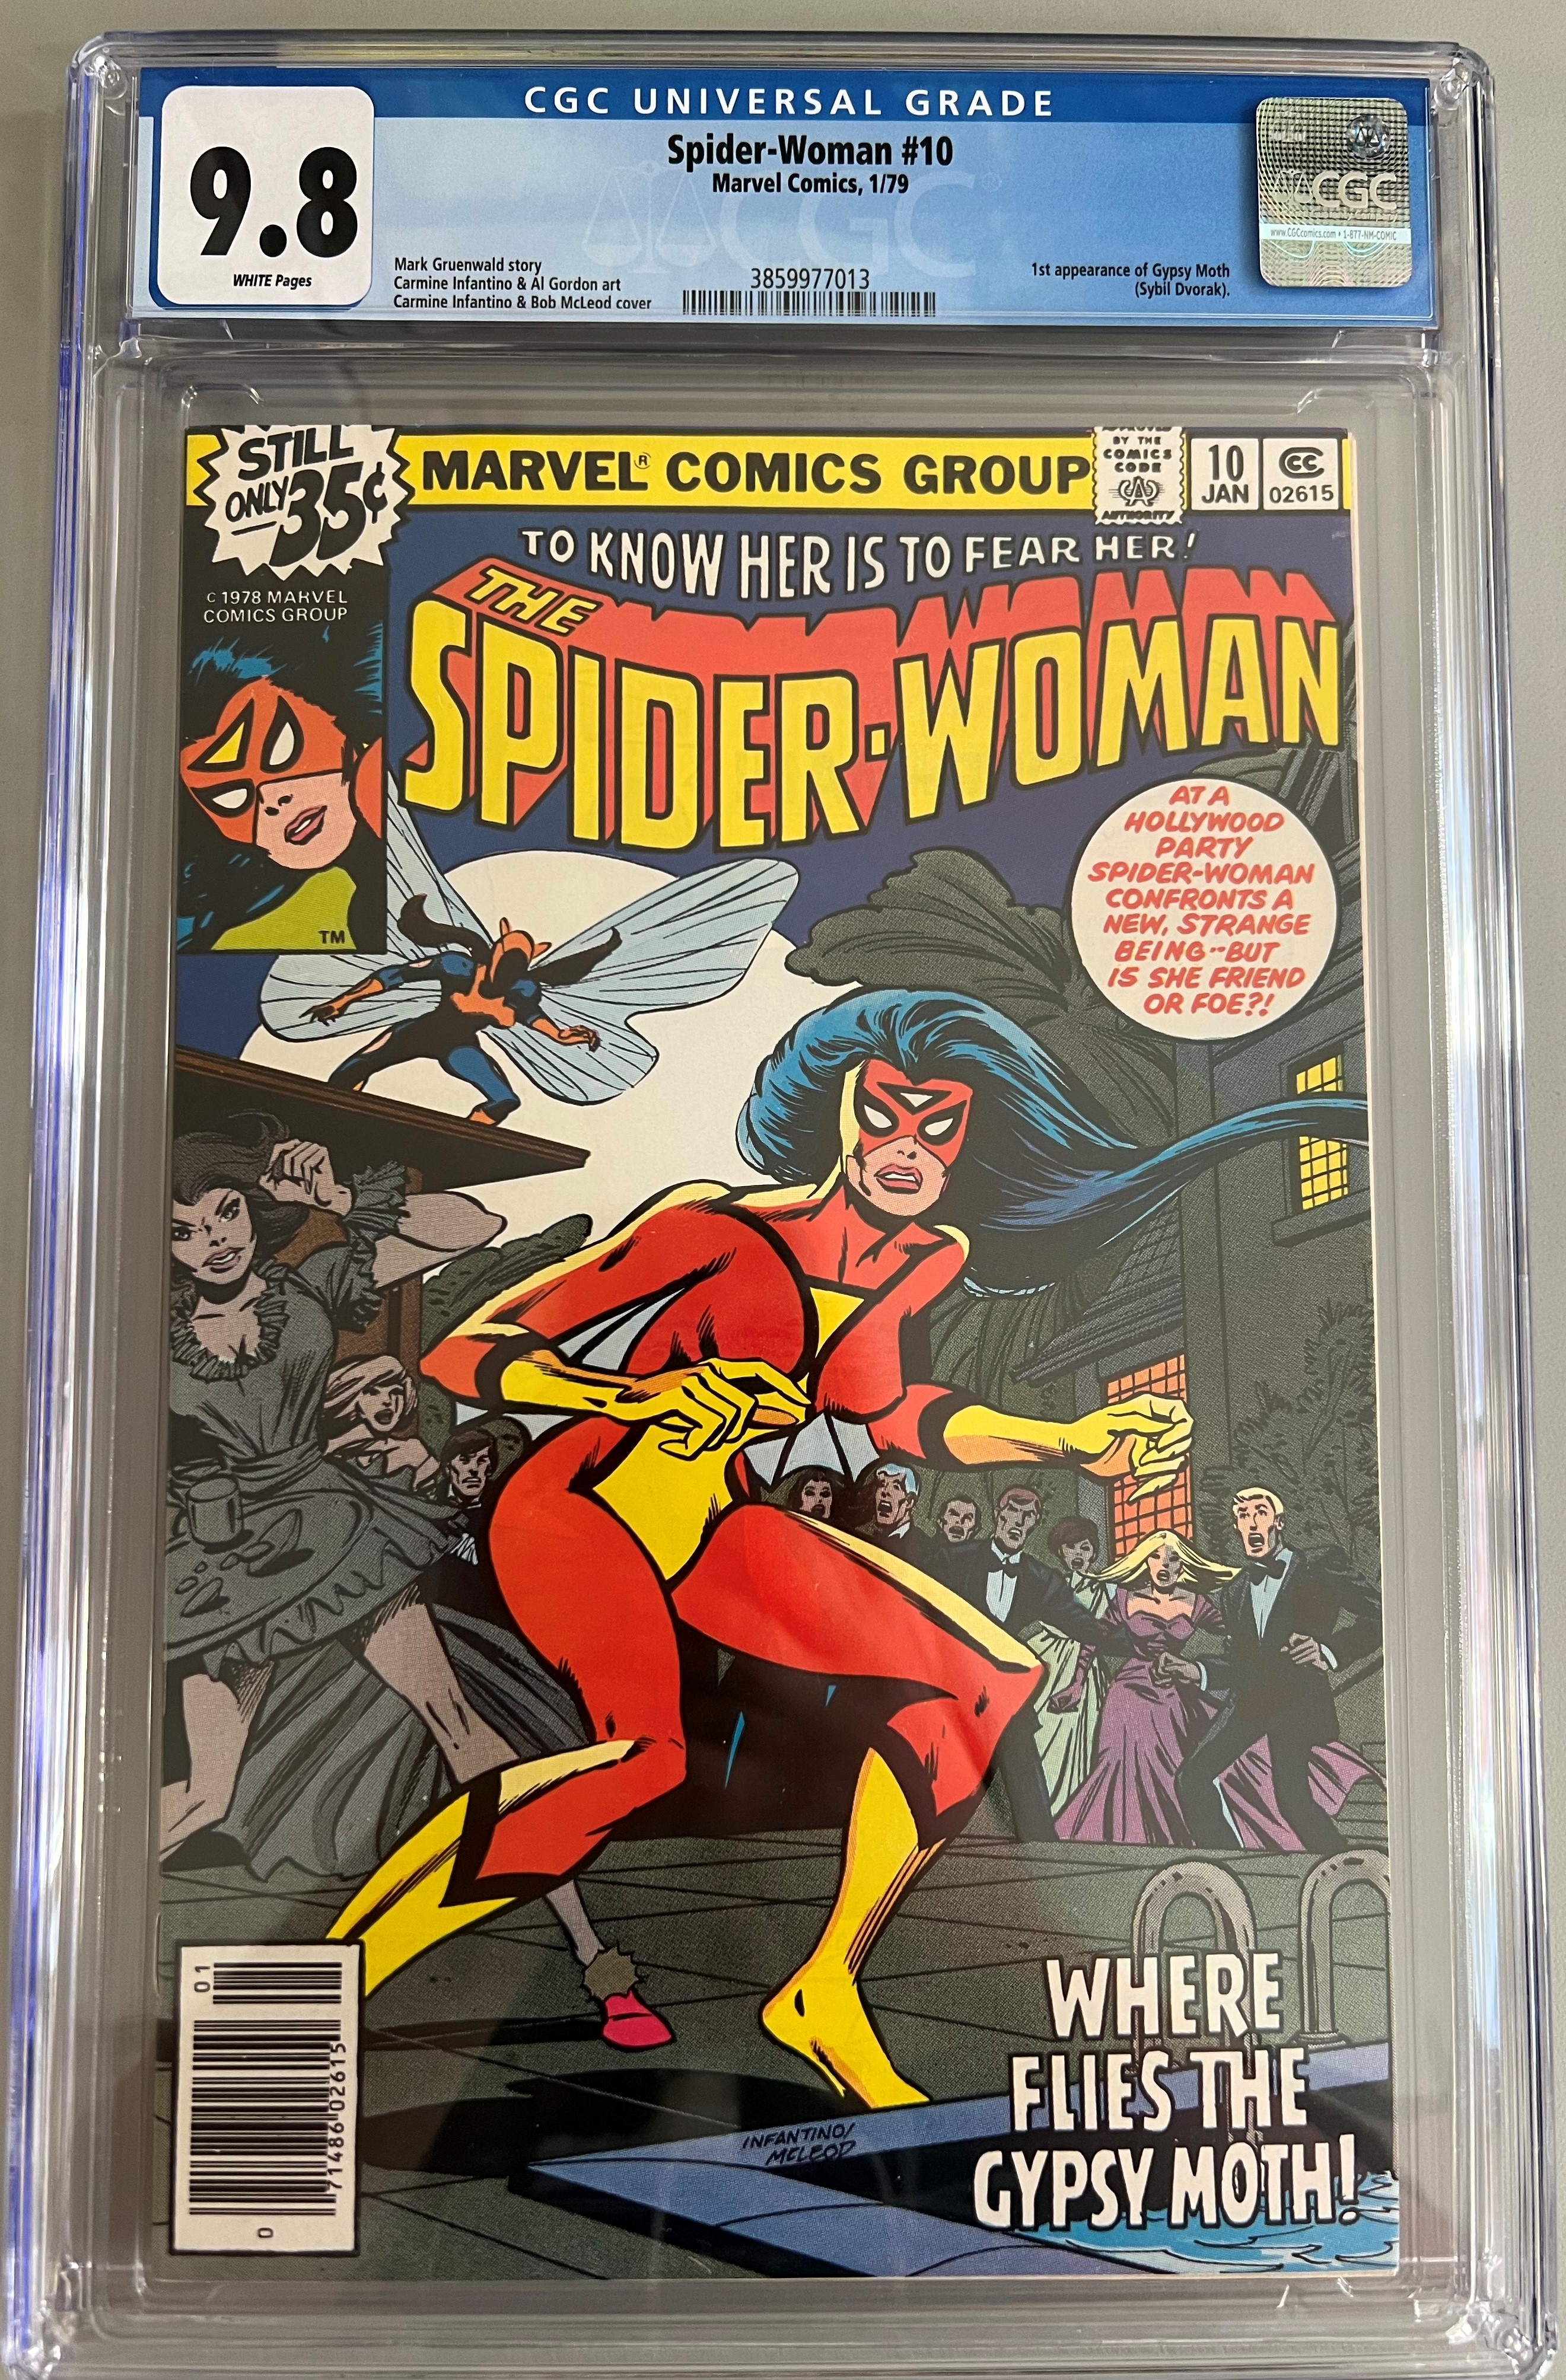 The Spider-Woman #10 CGC 9.8